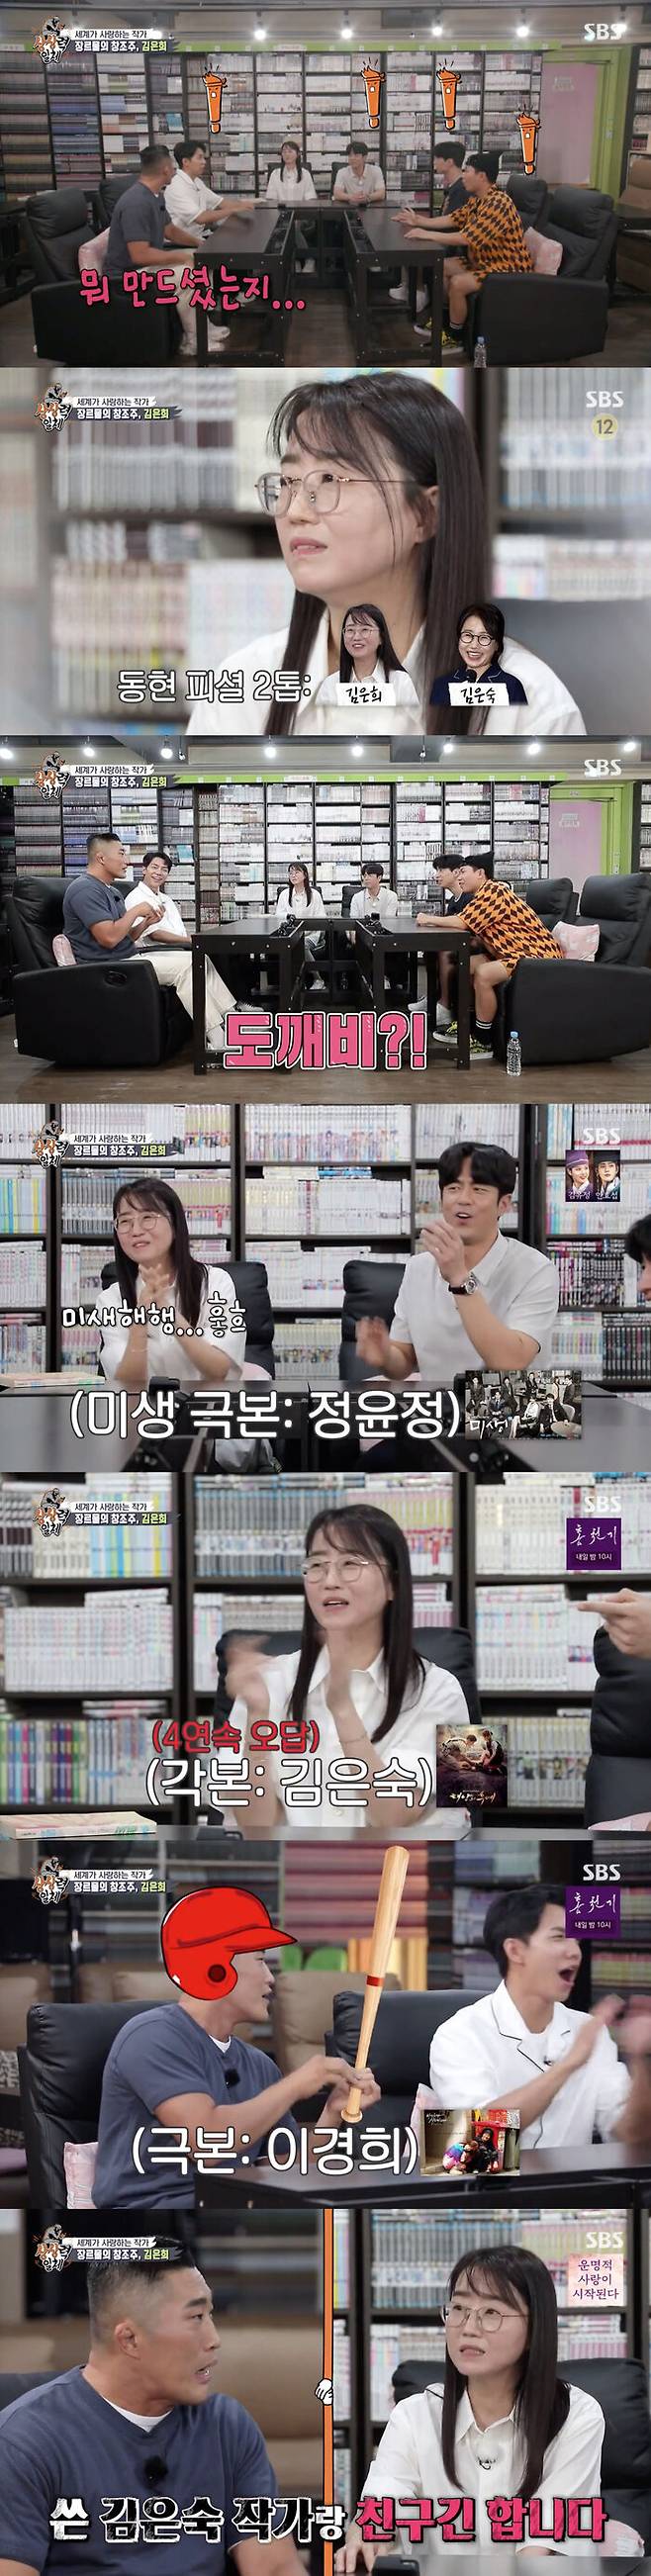 The creator of the genre, Kim Eun-hee, appeared as a master.On the 5th SBS All The Butlers, drama writer Kim Eun-hee appeared as master.On the day of the broadcast, Kim Dong-Hyun said, I am a great person, but I do not know what you made.The members encouraged them to tell them what they knew.Kim Dong-Hyun said, Is not it a great writer in our country? There are two great people, Kim Eun-hee and Kim Eun-sook.Among them, Kim Eun-hee is the writer. Kim Dong-Hyun then mentioned the work he knew was written by Kim Eun-hee.He laughed at the work written by Kim Eun-hee, including Guardian: The Lonely and Great God, Paris Couple, Microbiology, Suns Dear, Sorry Love, and so on.Kim Eun-hee, author, said, Guardian: The Lonely and Great God, the Couple of Paris, and Kim Eun-sook, who wrote the descendants of the sun. He laughed that there was no answer among the comments he mentioned.Yoo Soo-bin then mentioned the works of Kim Eun-hee in turn, and Kim Dong-Hyun was found to have no information at all.Finally, Yoo Soo-bin mentioned Kingdom, and Kim Dong-Hyun was surprised and said, I saw it almost for the first time among our people.